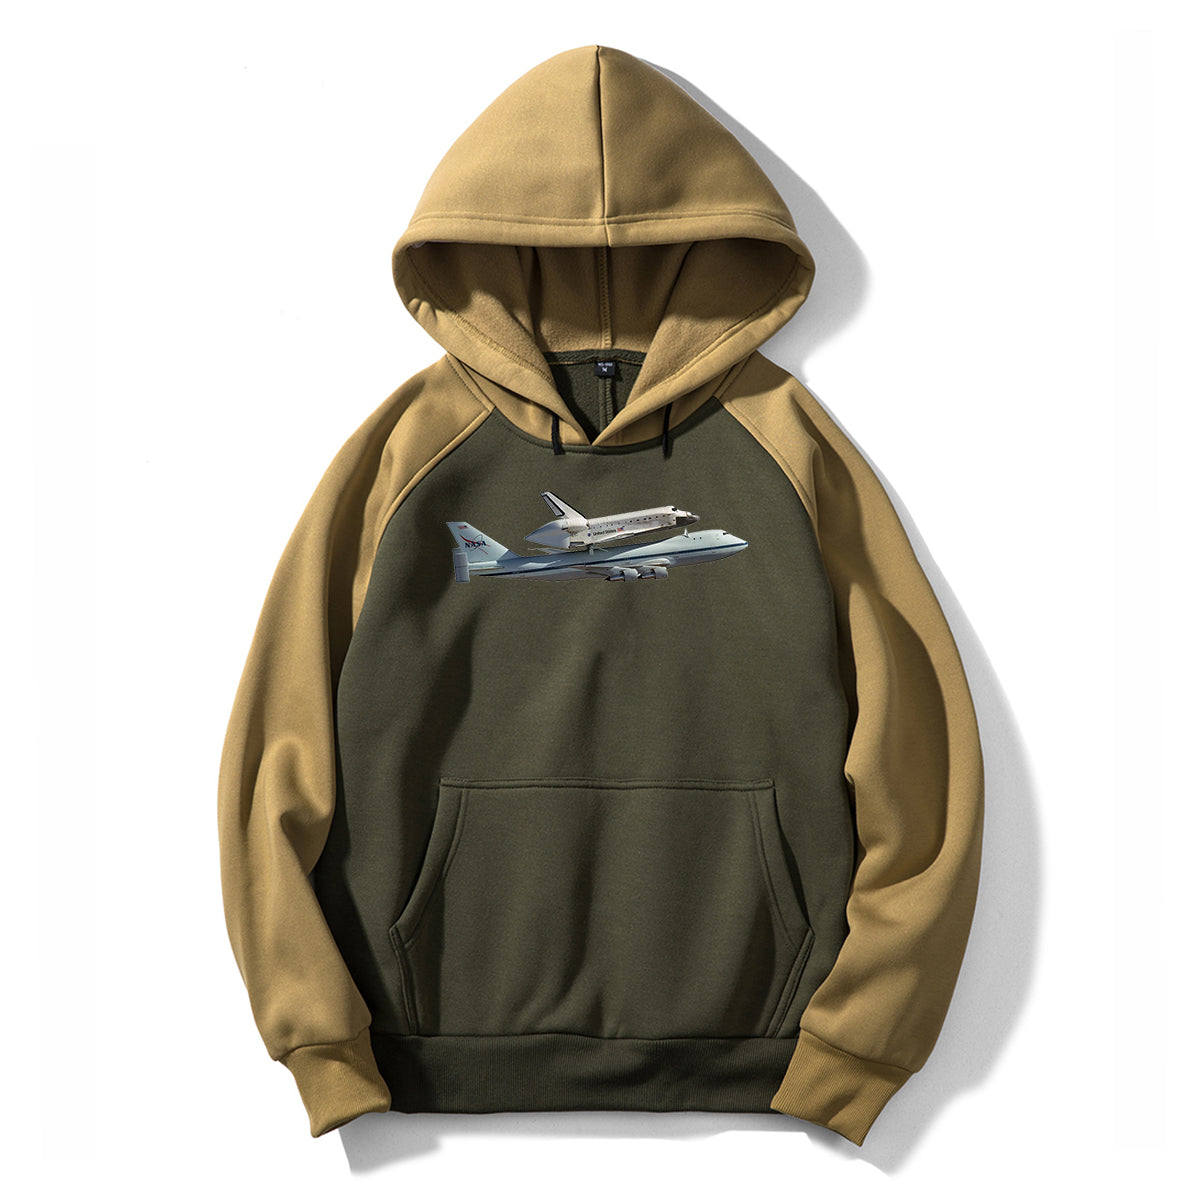 Space shuttle on 747 Designed Colourful Hoodies